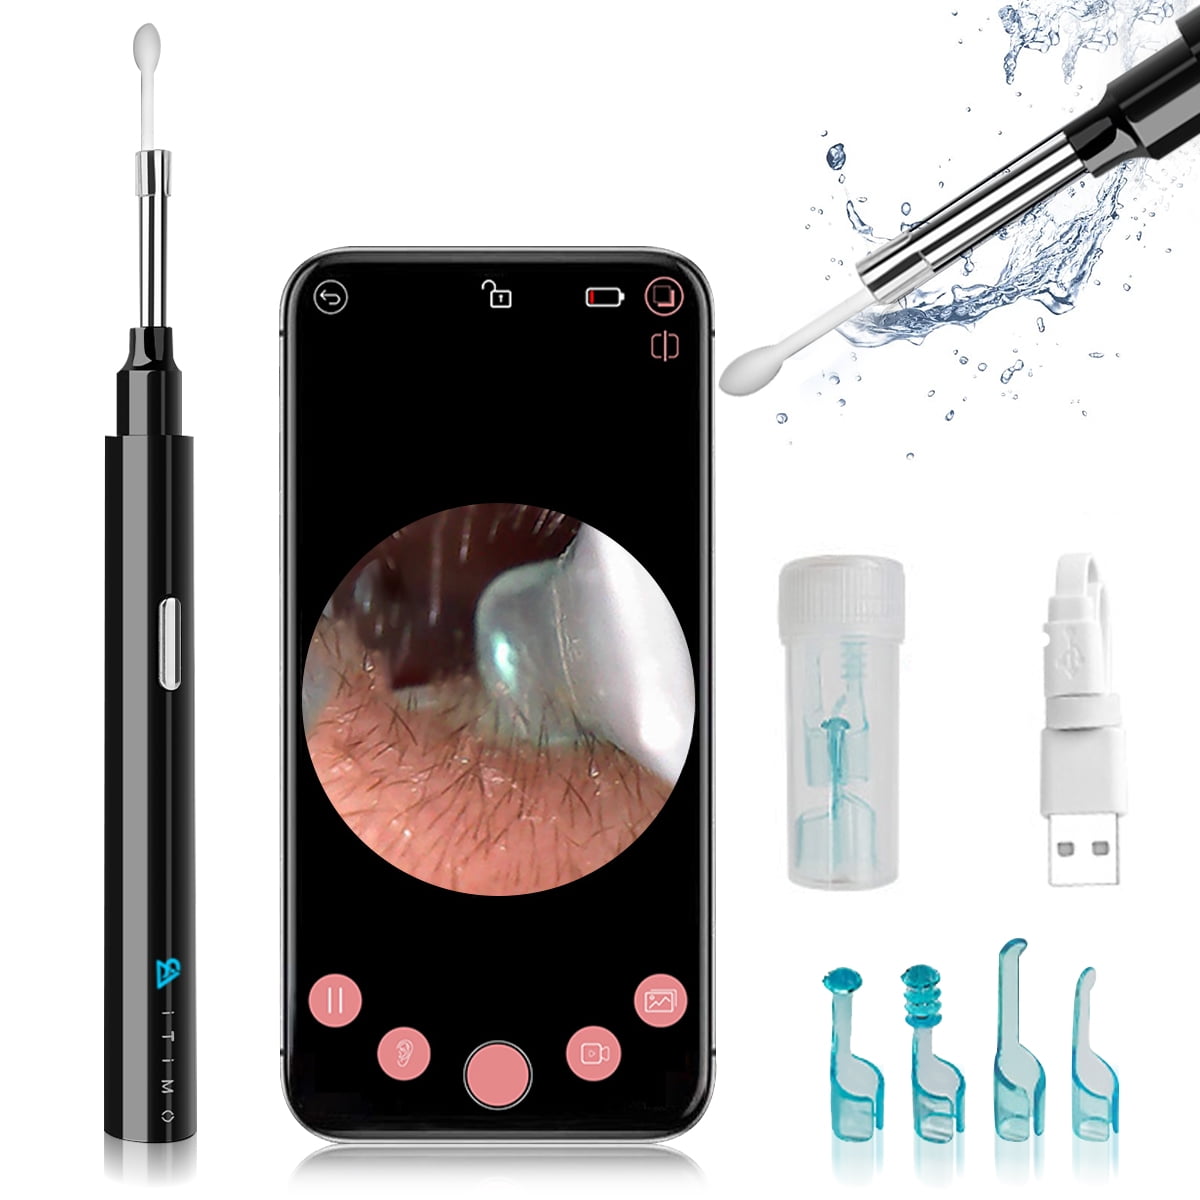 Details about   Camera Wifi Ear Cleaner Endoscope Visual Picker Inspection Tunnel For Phone 